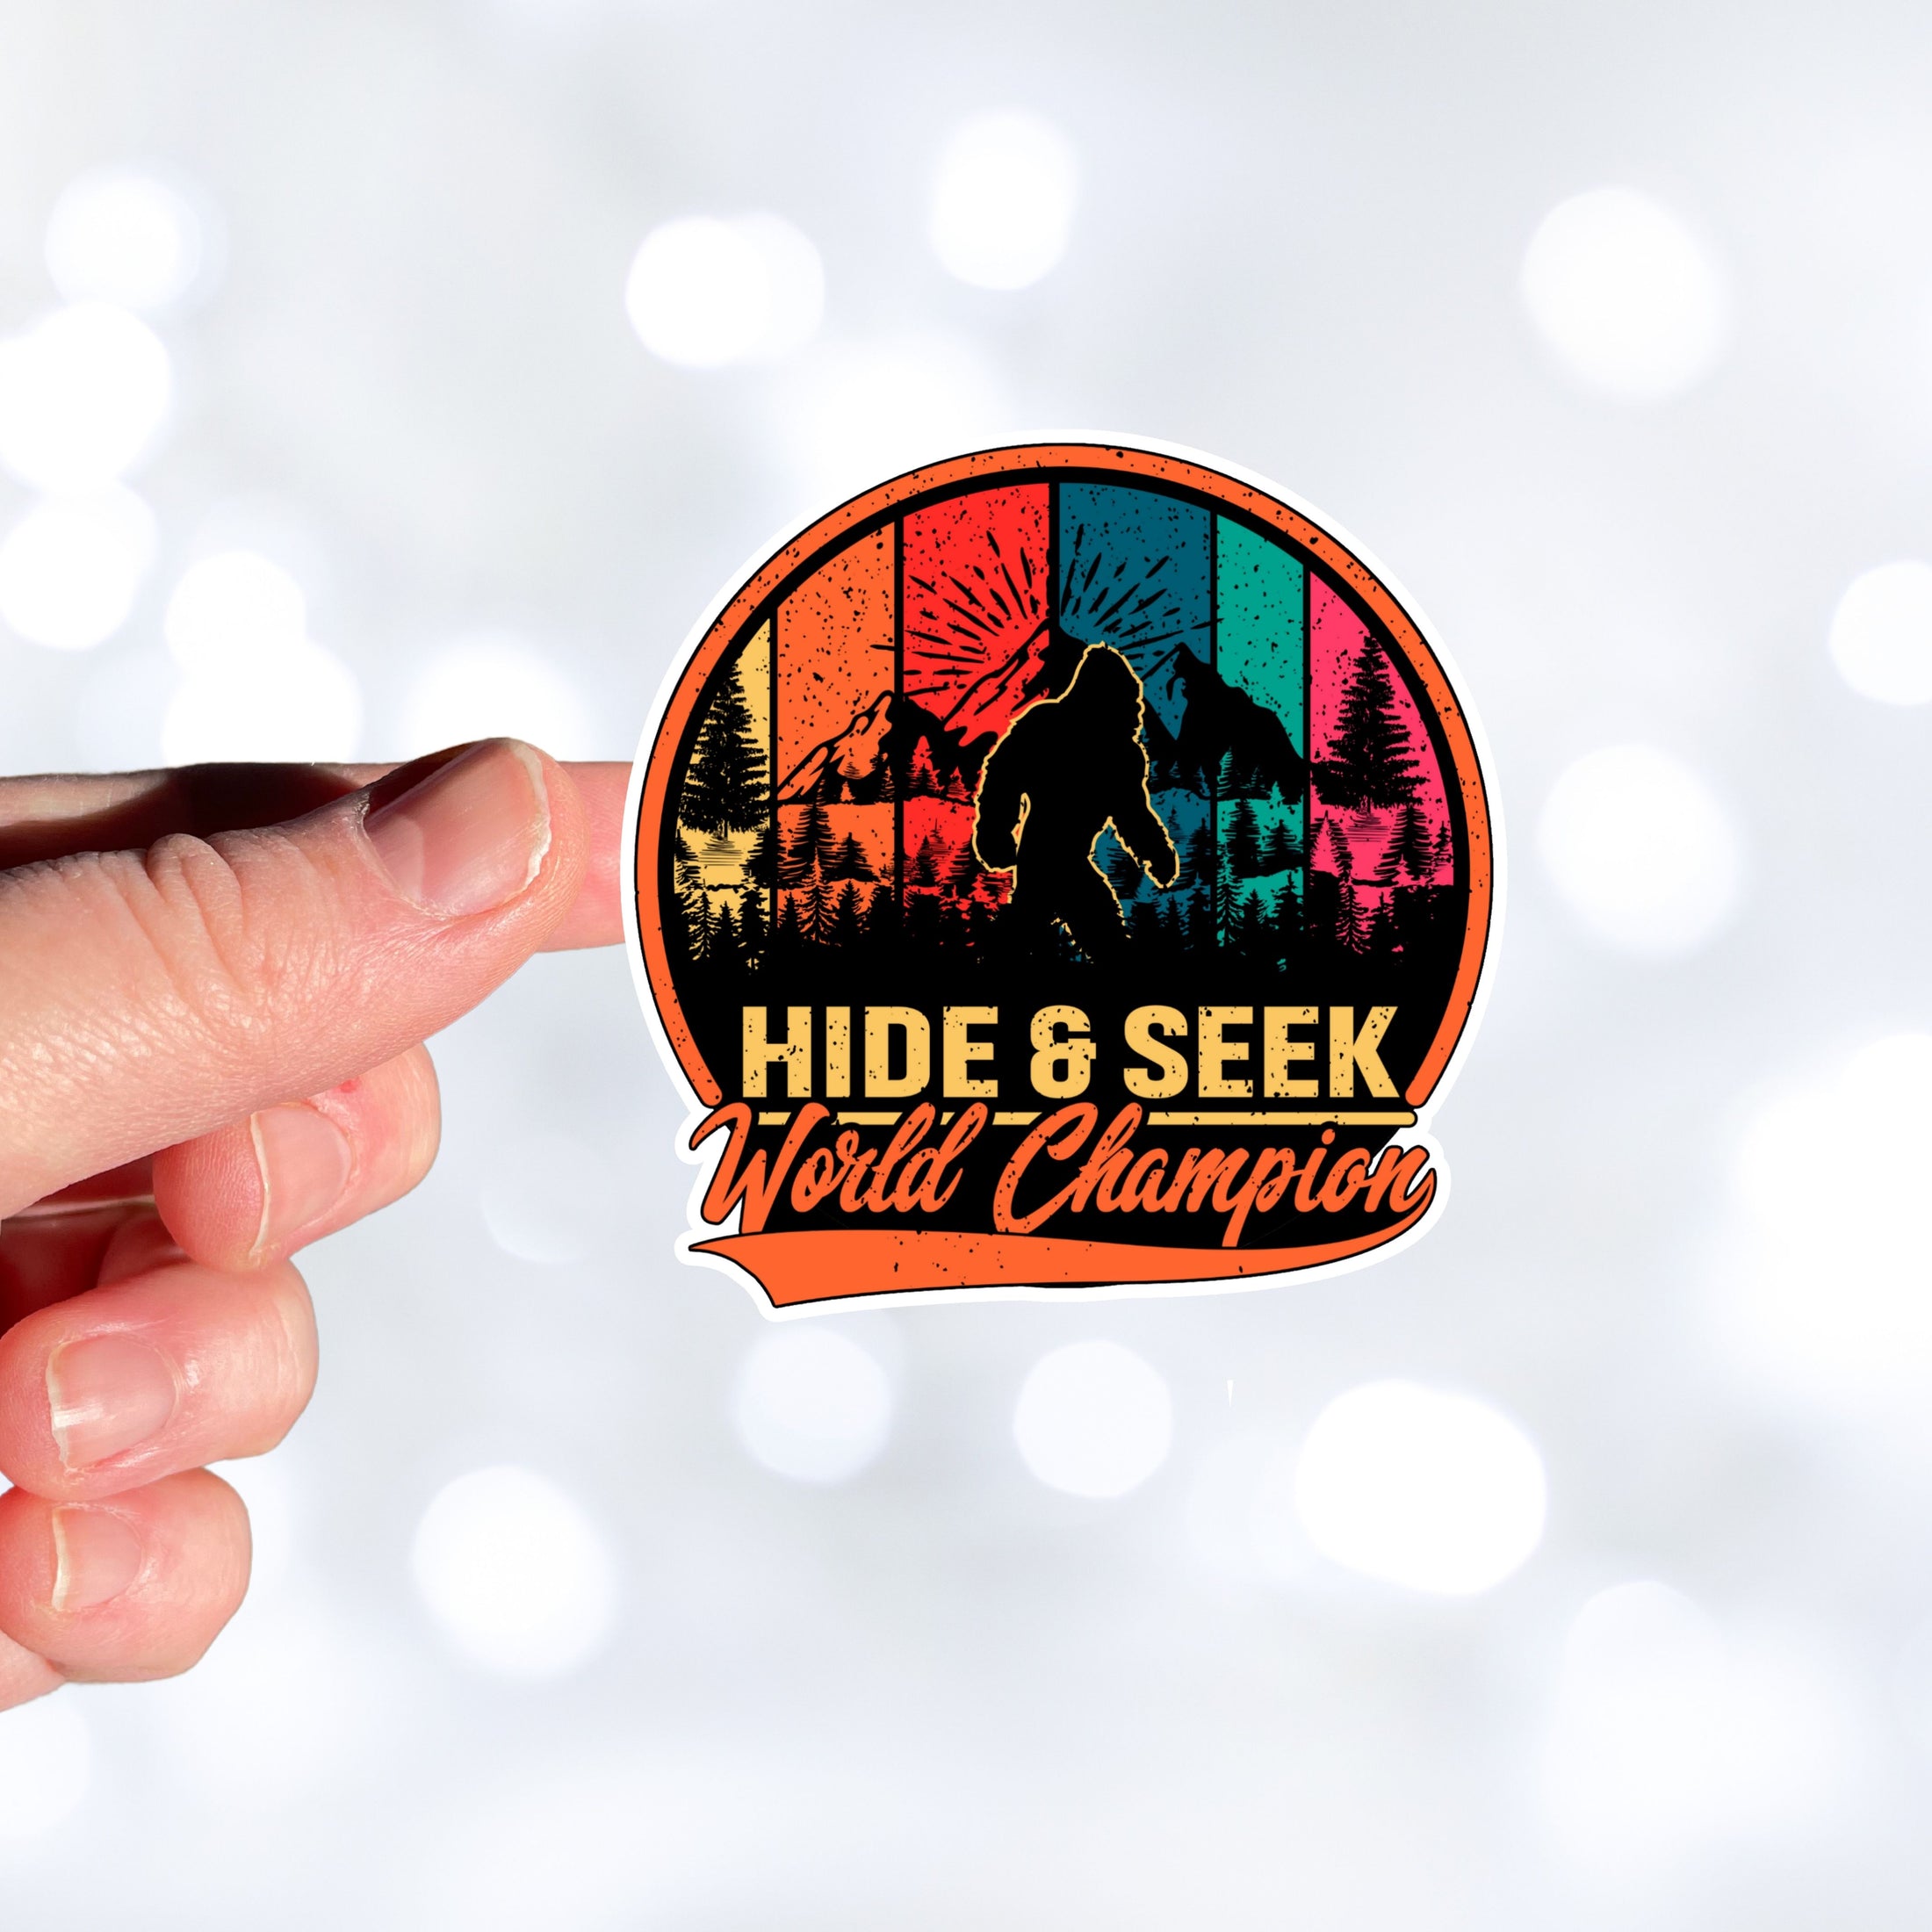 This image shows a hand holding the hide & seek sticker.